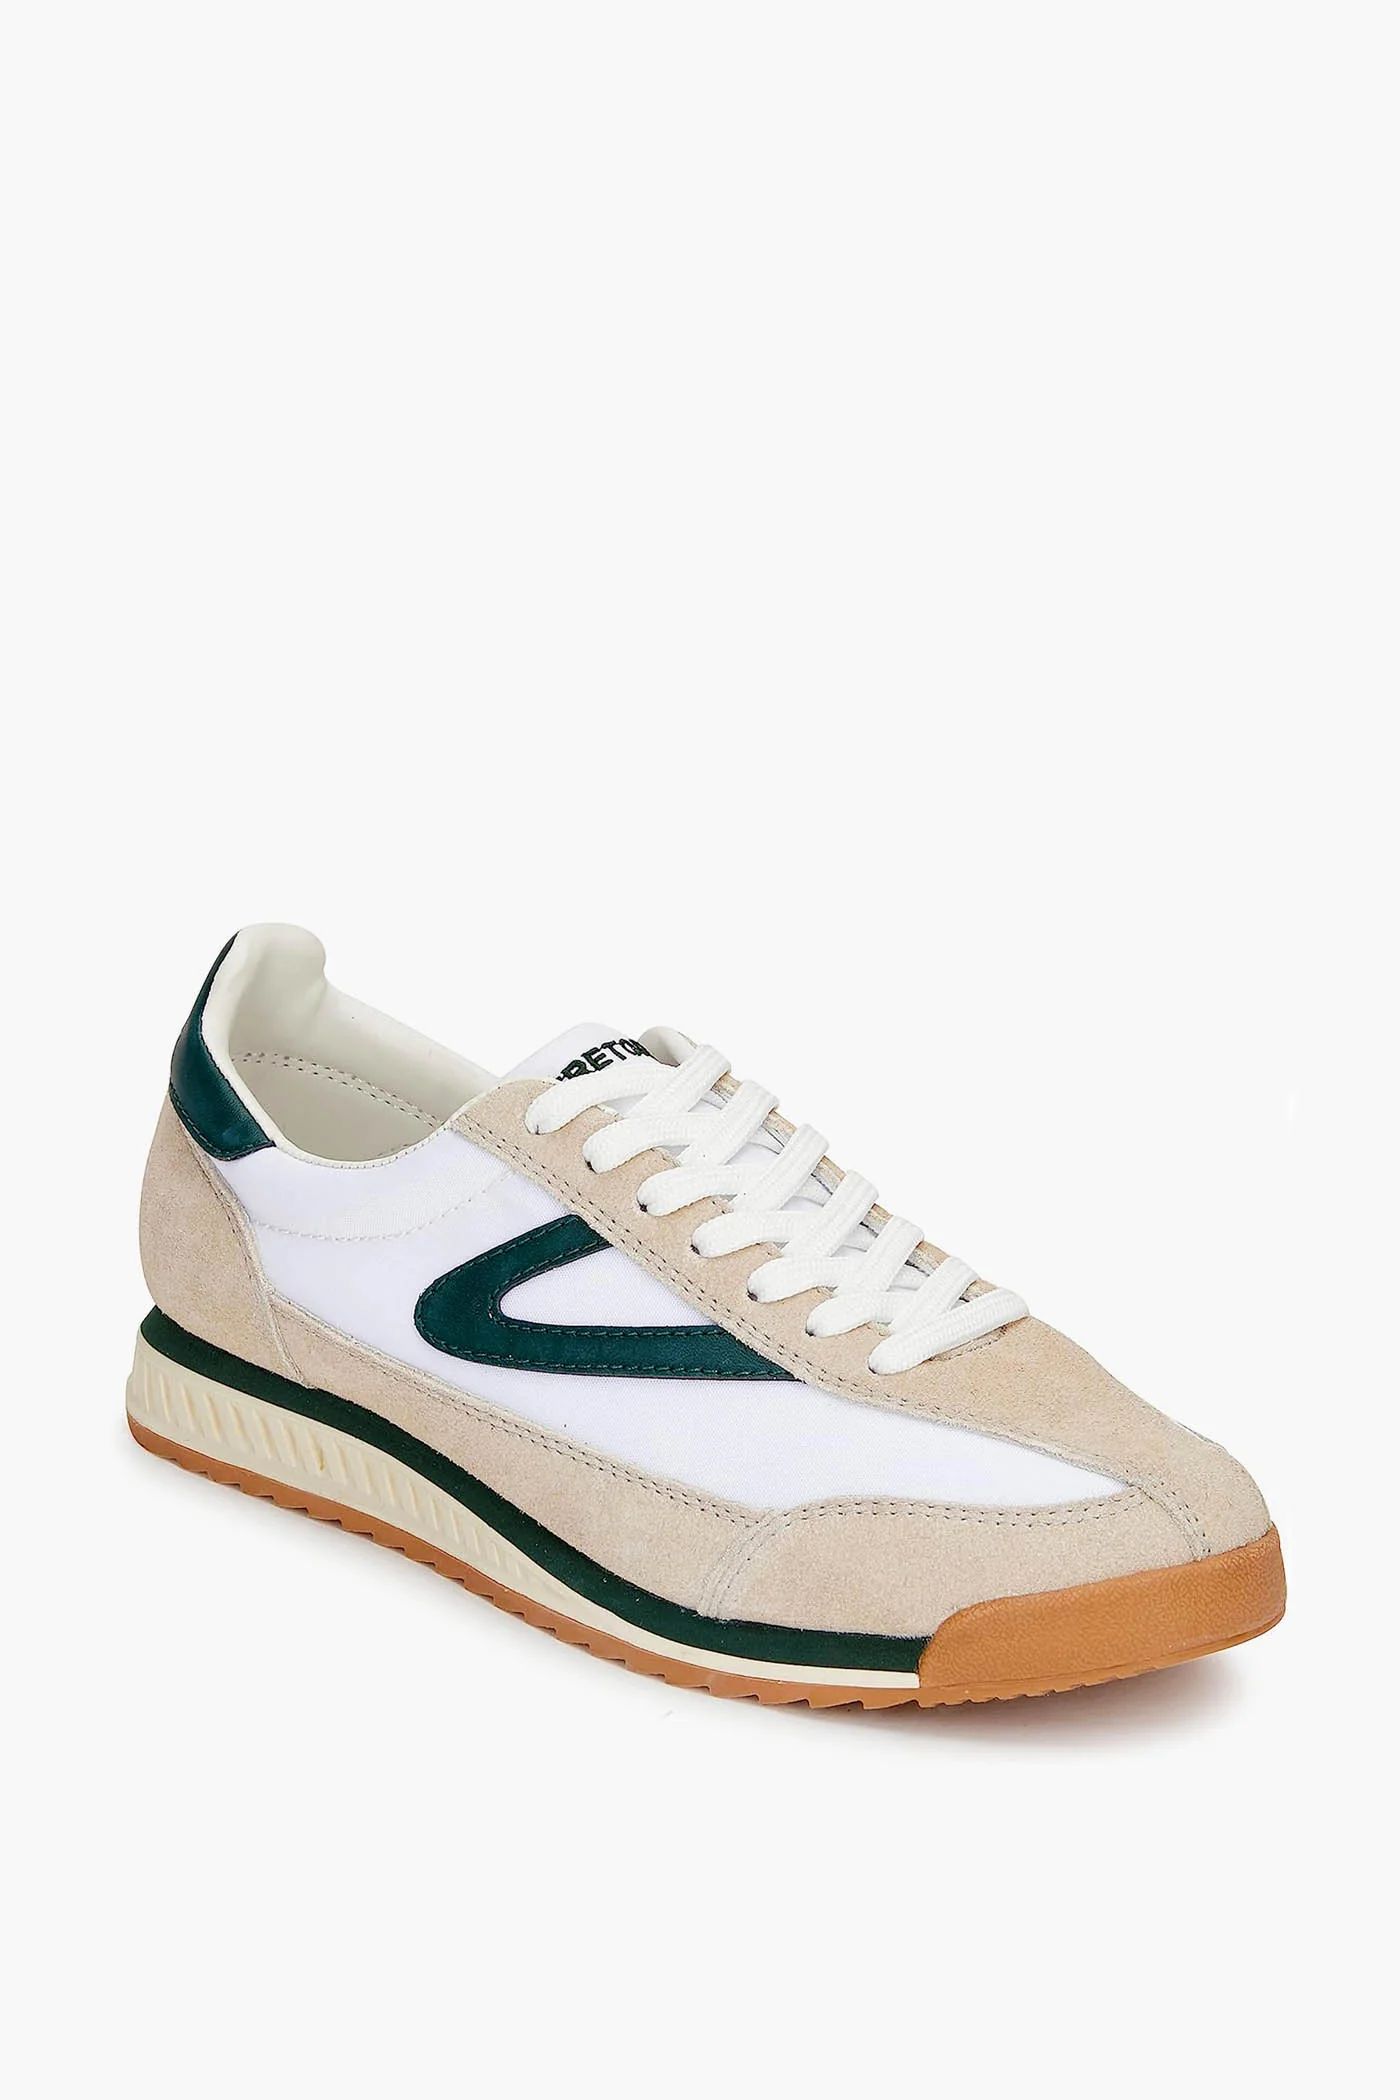 Women's White and Green Rawlins Sneakers | Tuckernuck (US)